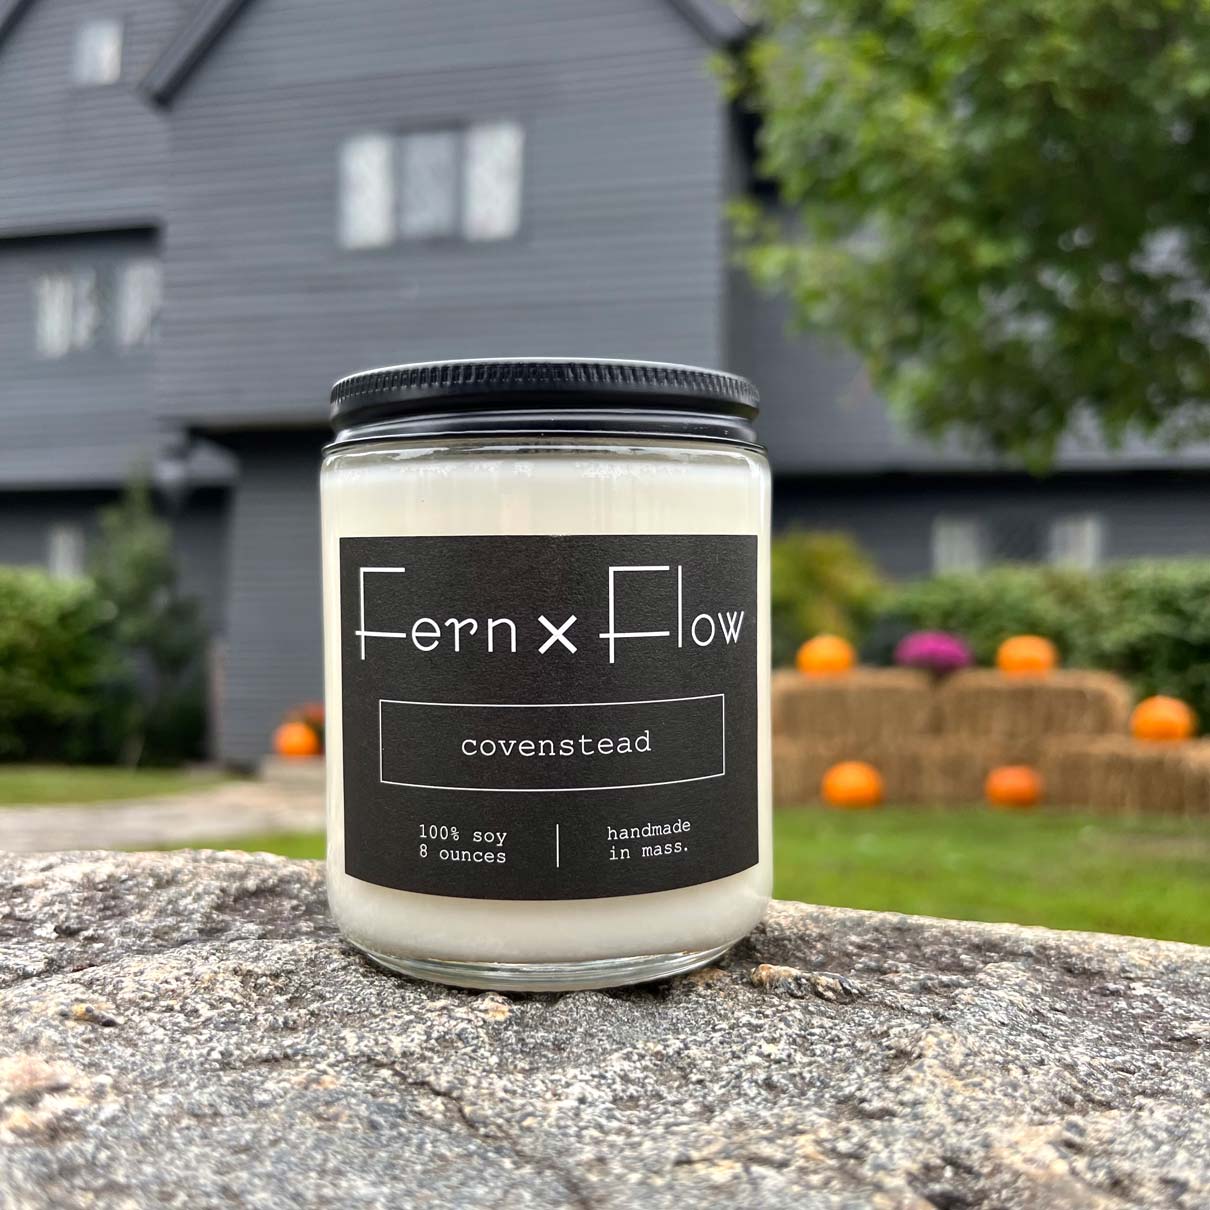 Fern x Flow Covenstead Halloween soy candle with a black and white label in front of The Salem Witch House in Salem MA